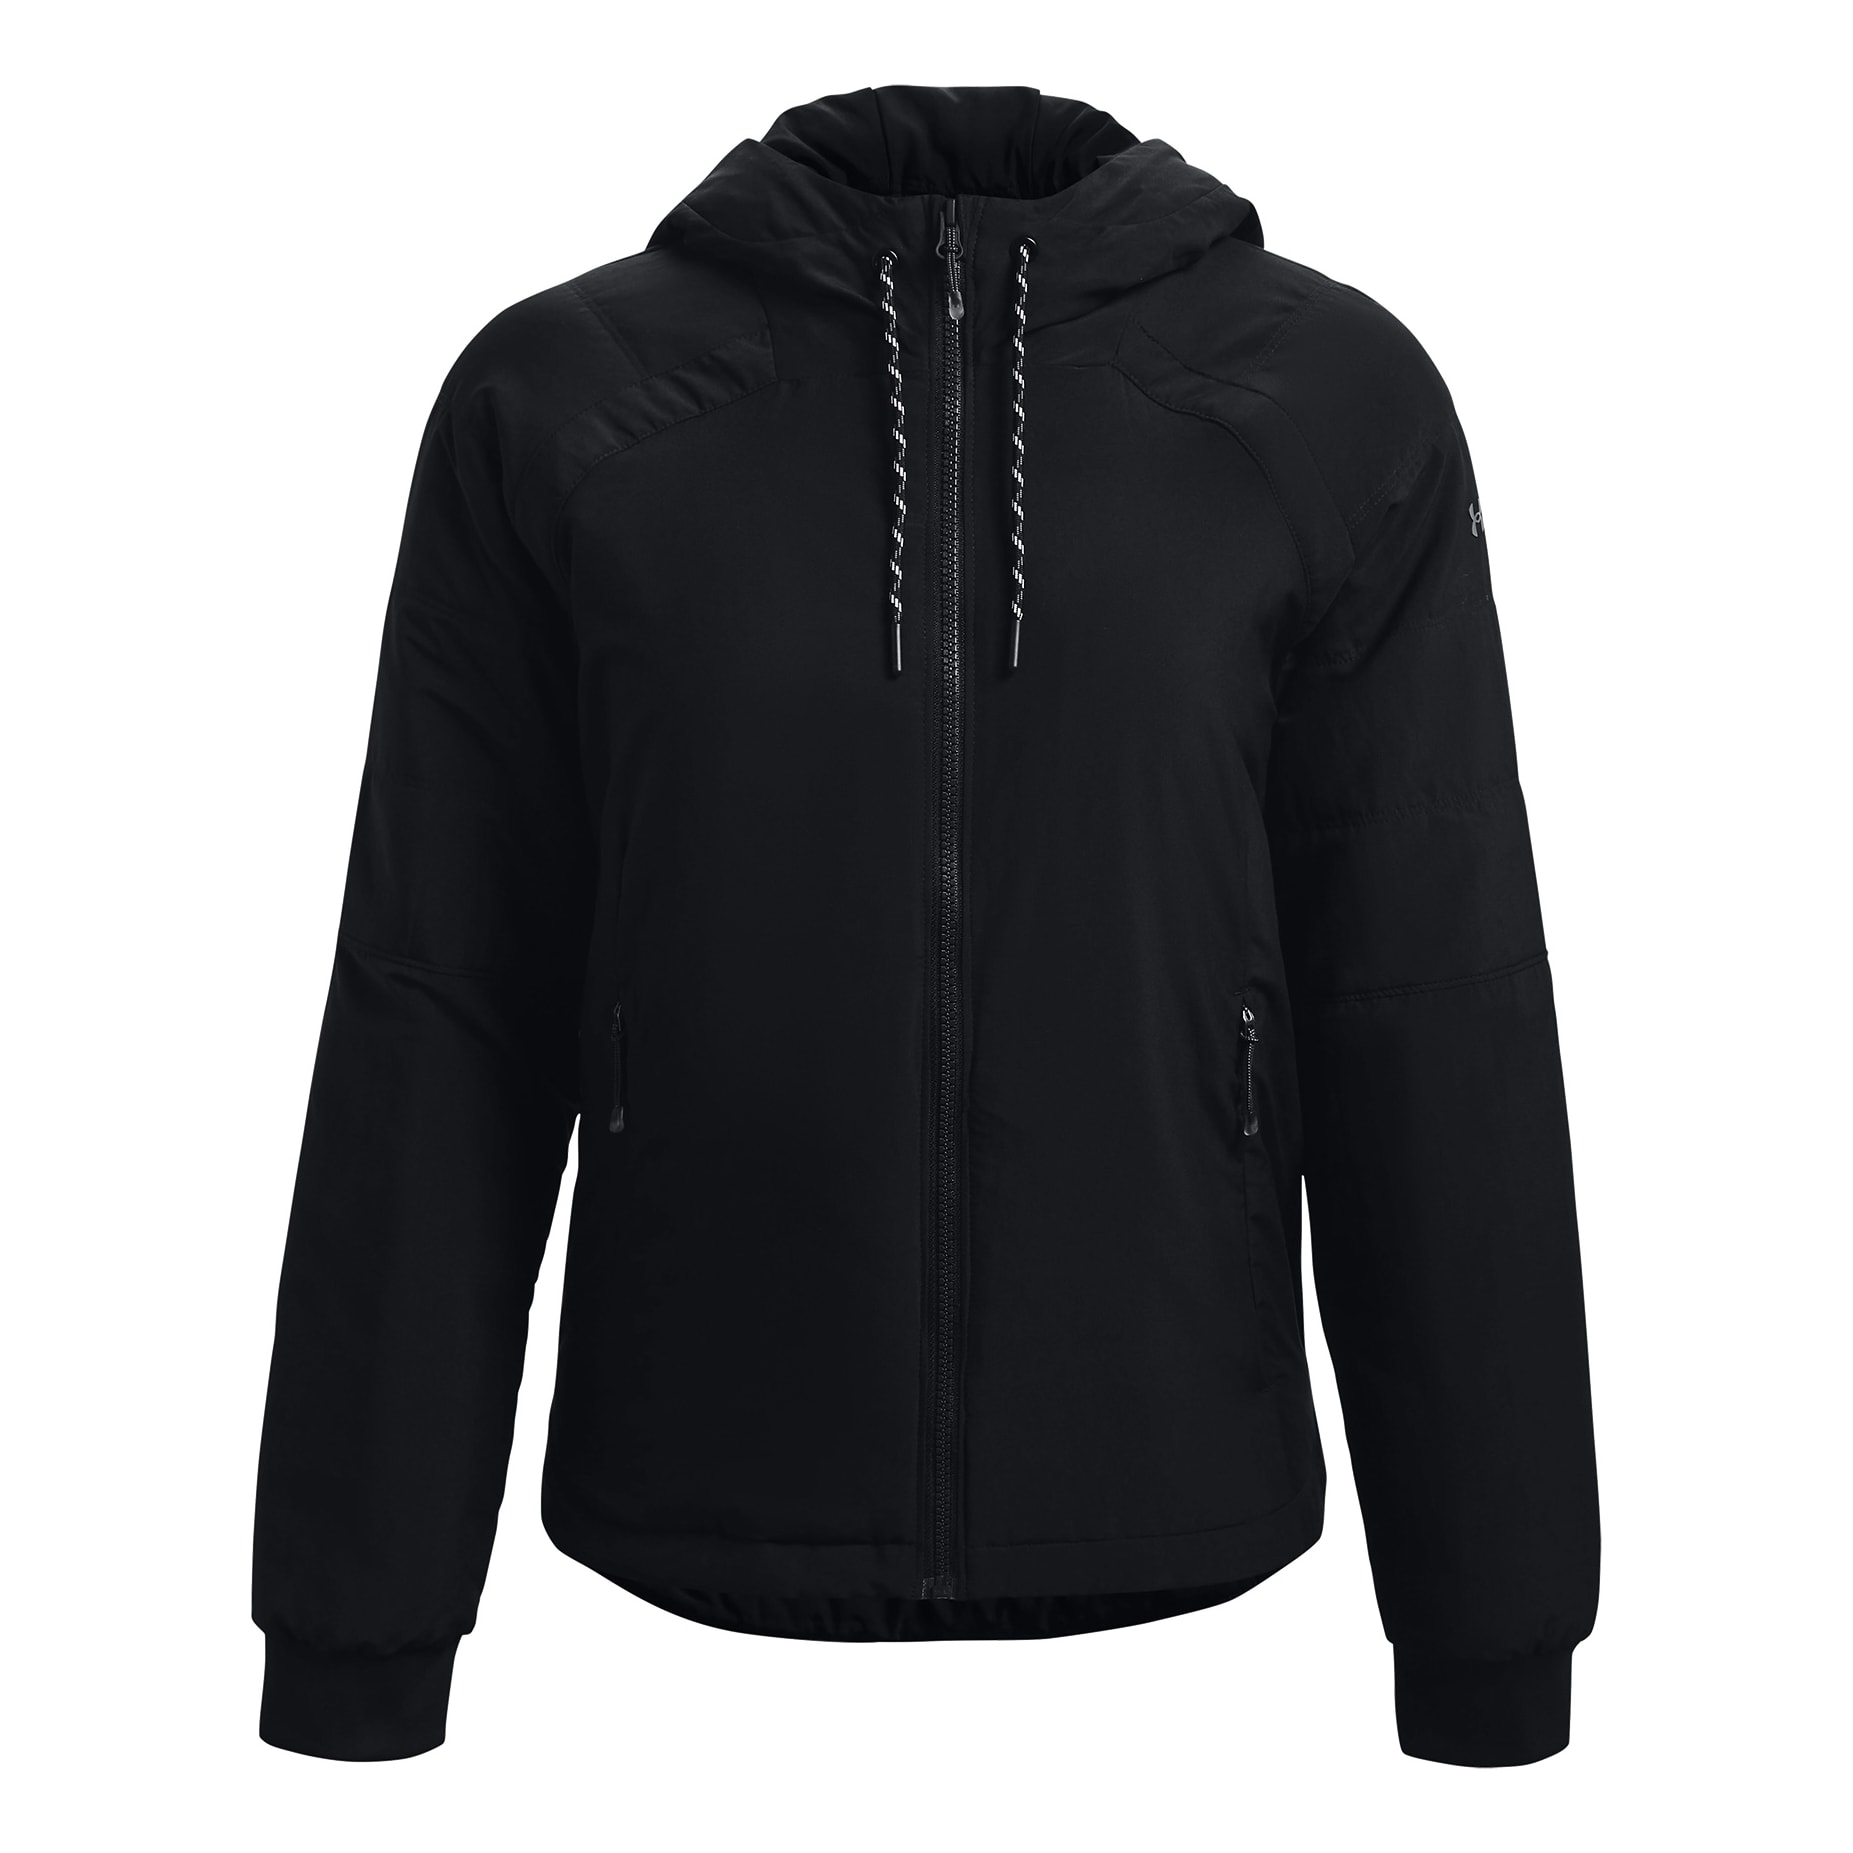 Under Armour® Women’s Sky Insulated 2.0 Hoodie